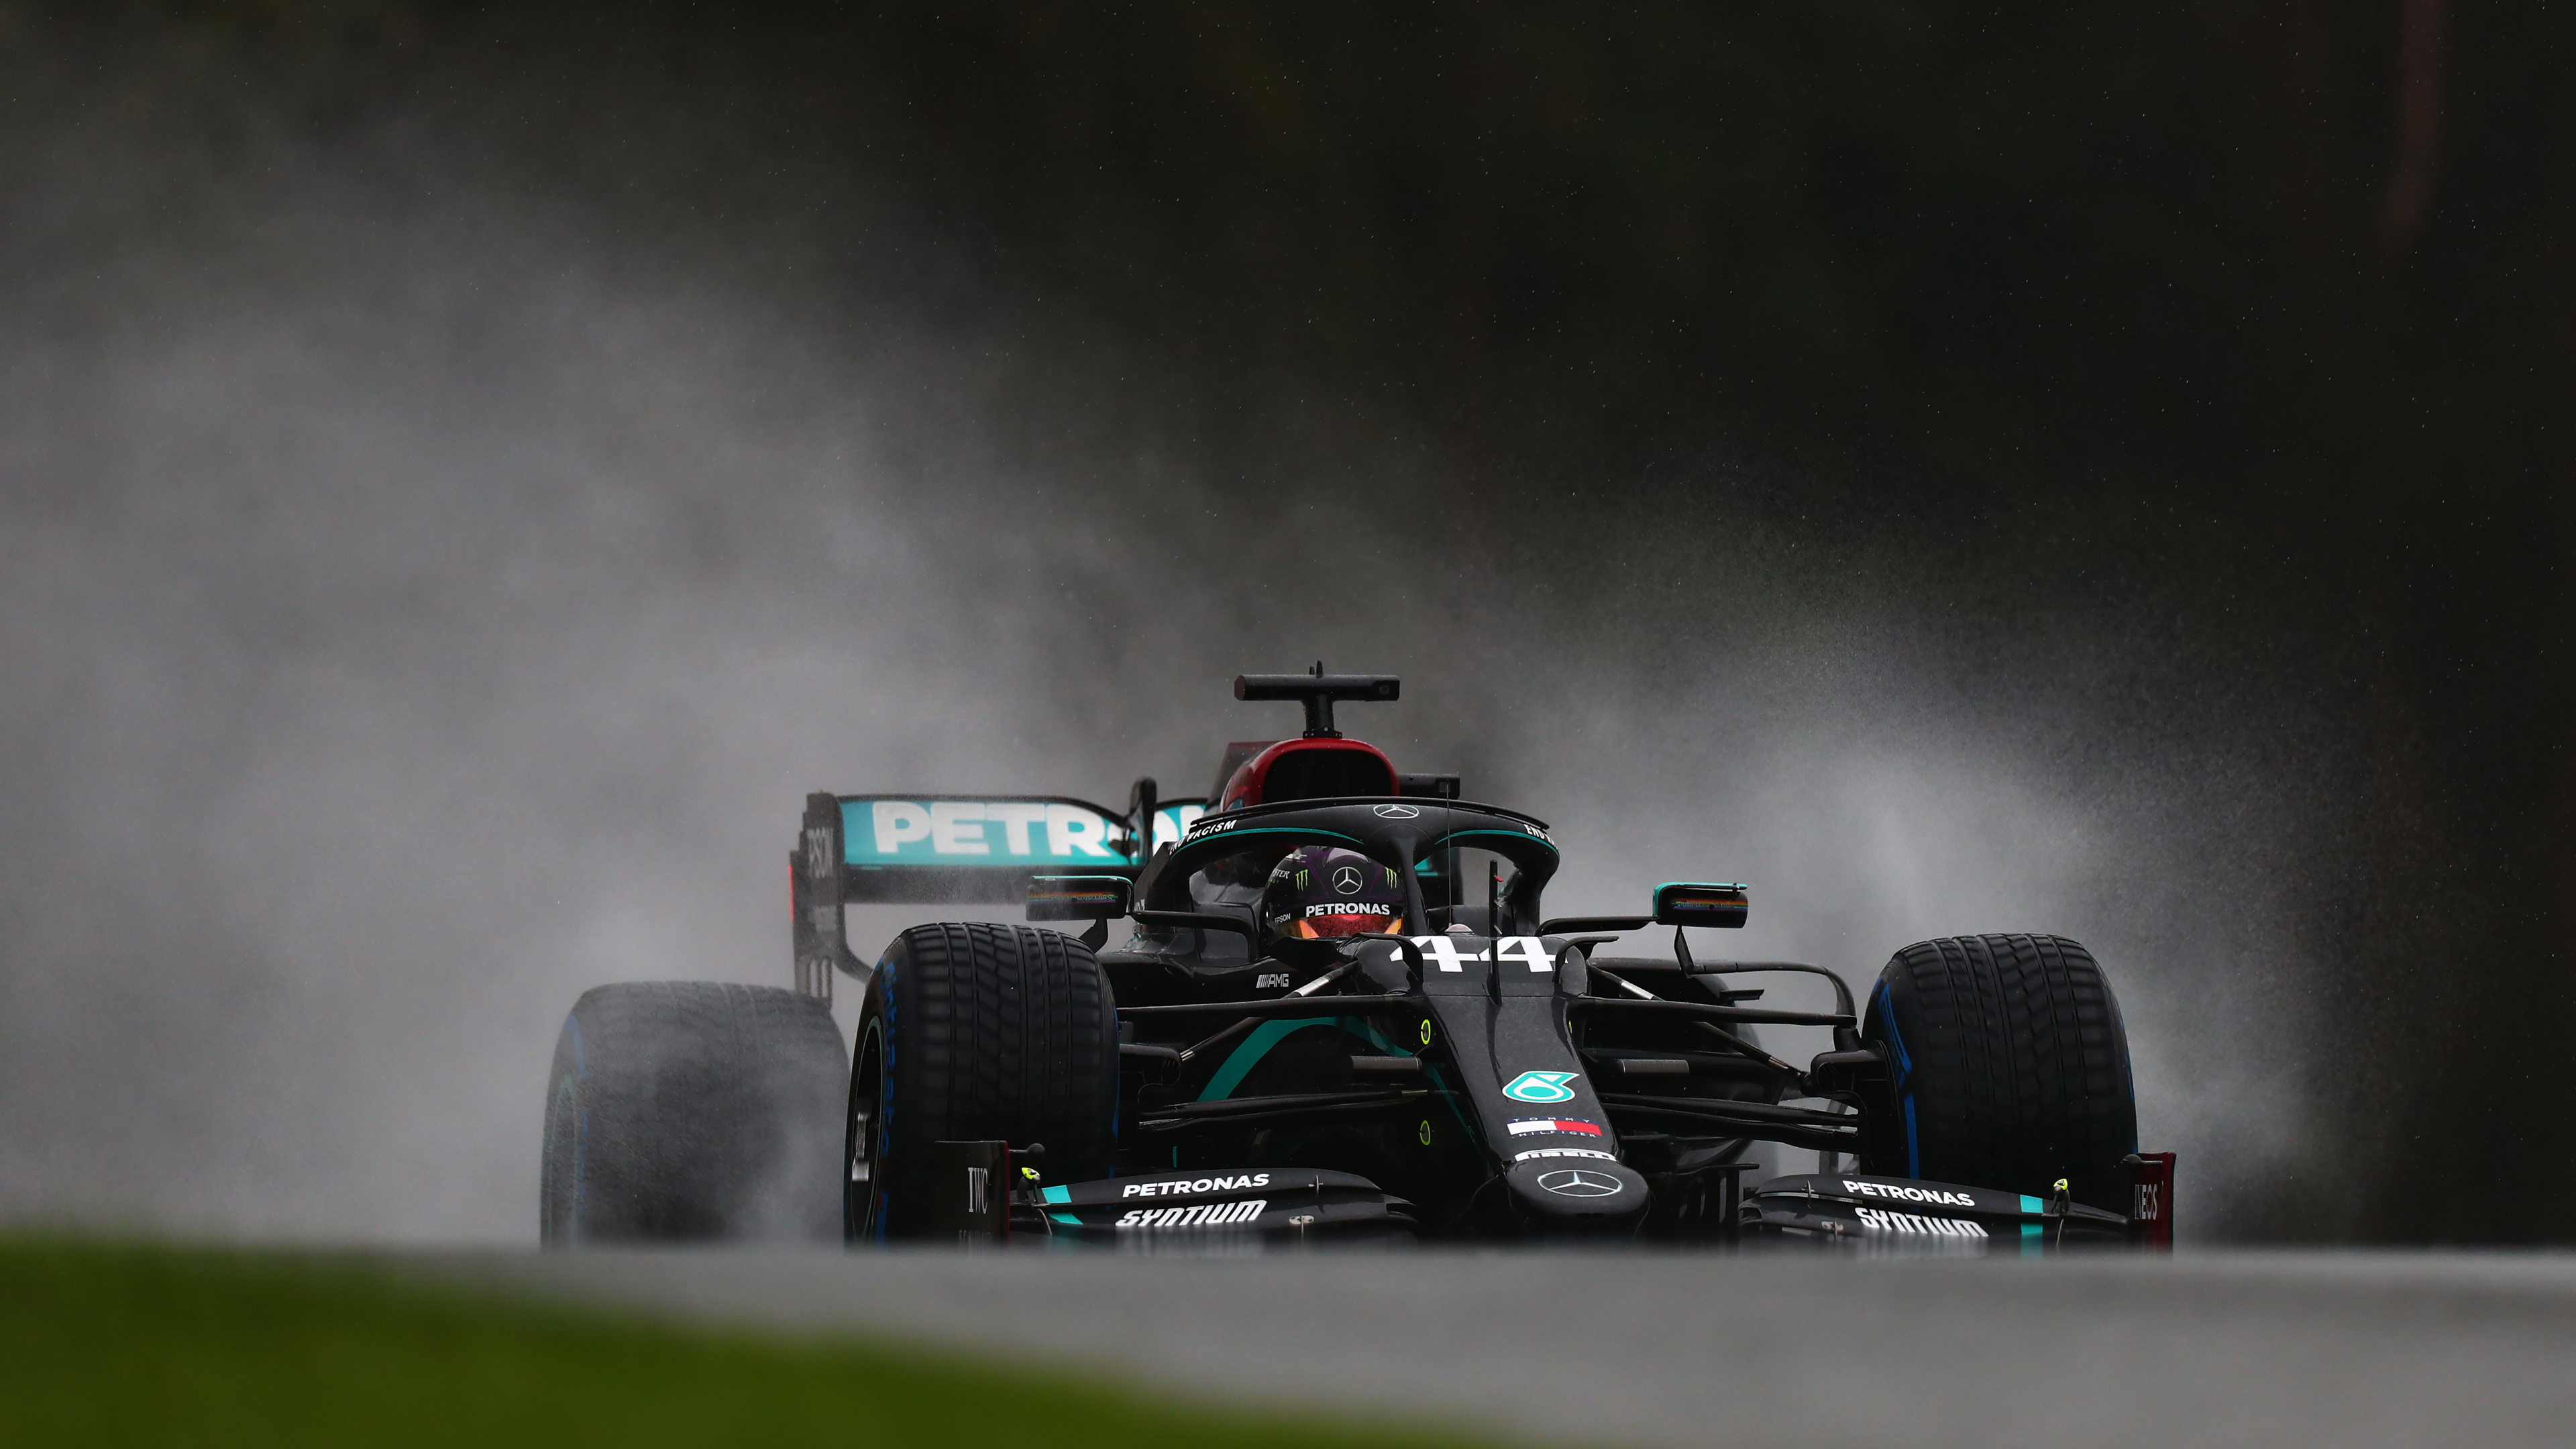 Styrian Grand Prix 2020 Qualifying Report And Highlights Dominant Hamilton Beats Verstappen To Pole By 1 2s With Epic Lap In The Wet Formula 1